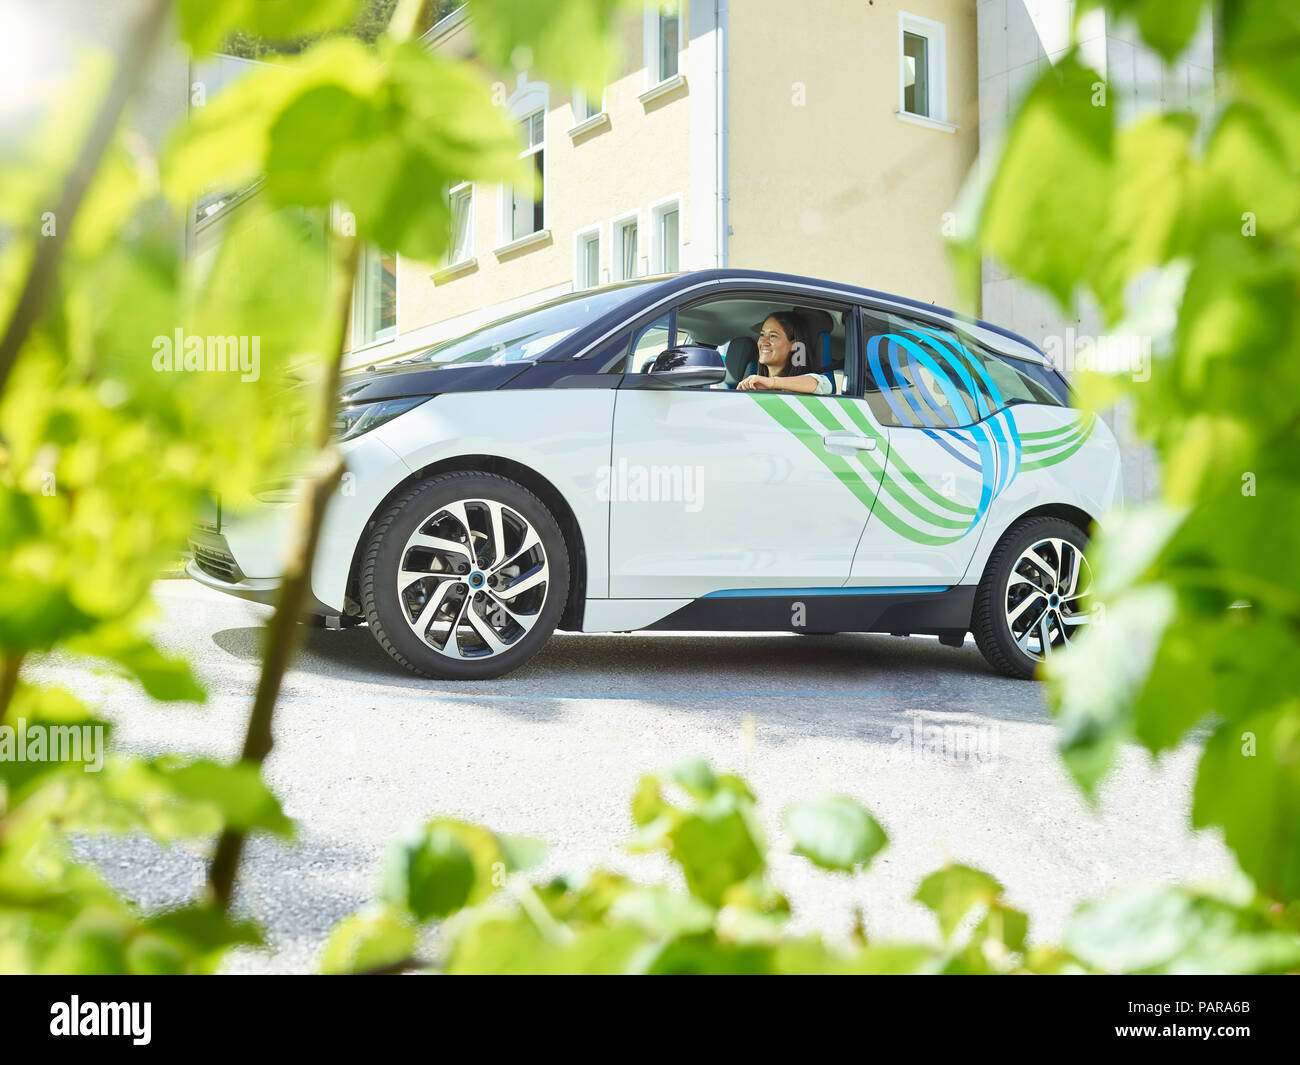 Smiling woman sitting in electric car Stock Photo